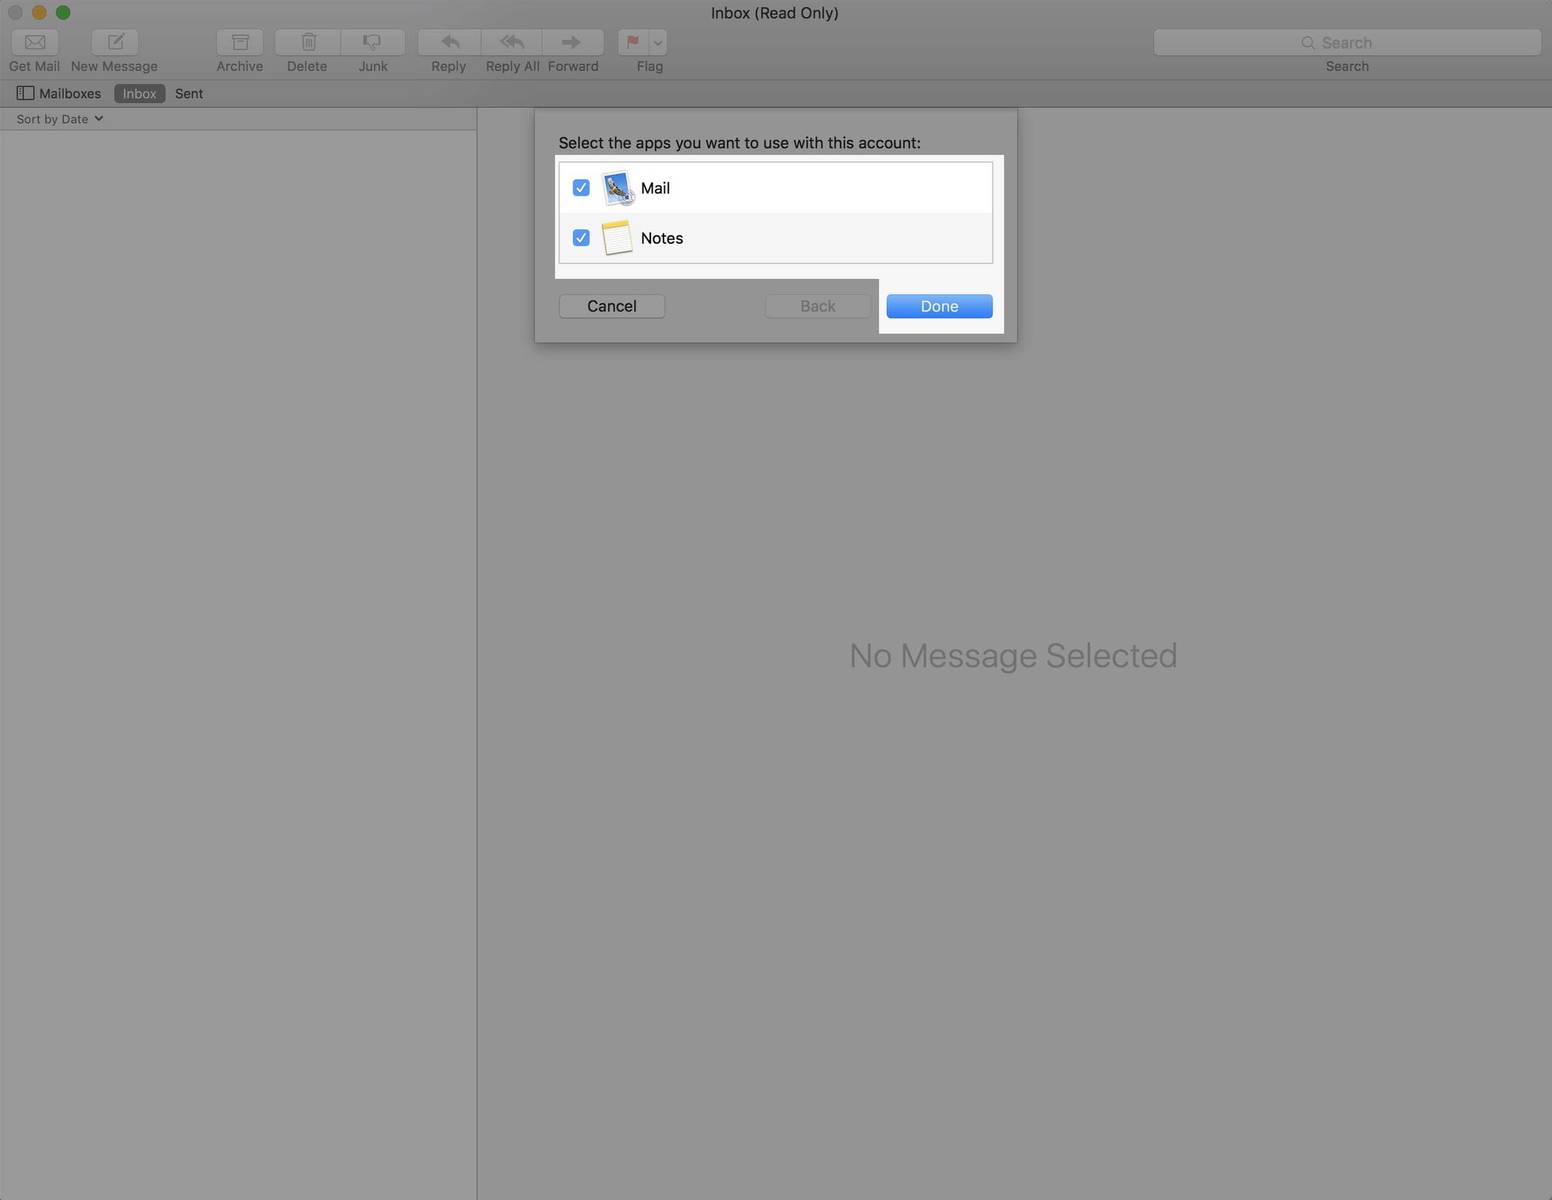 Step 4: Mail will verify your settings. Click Done to view your inbox.